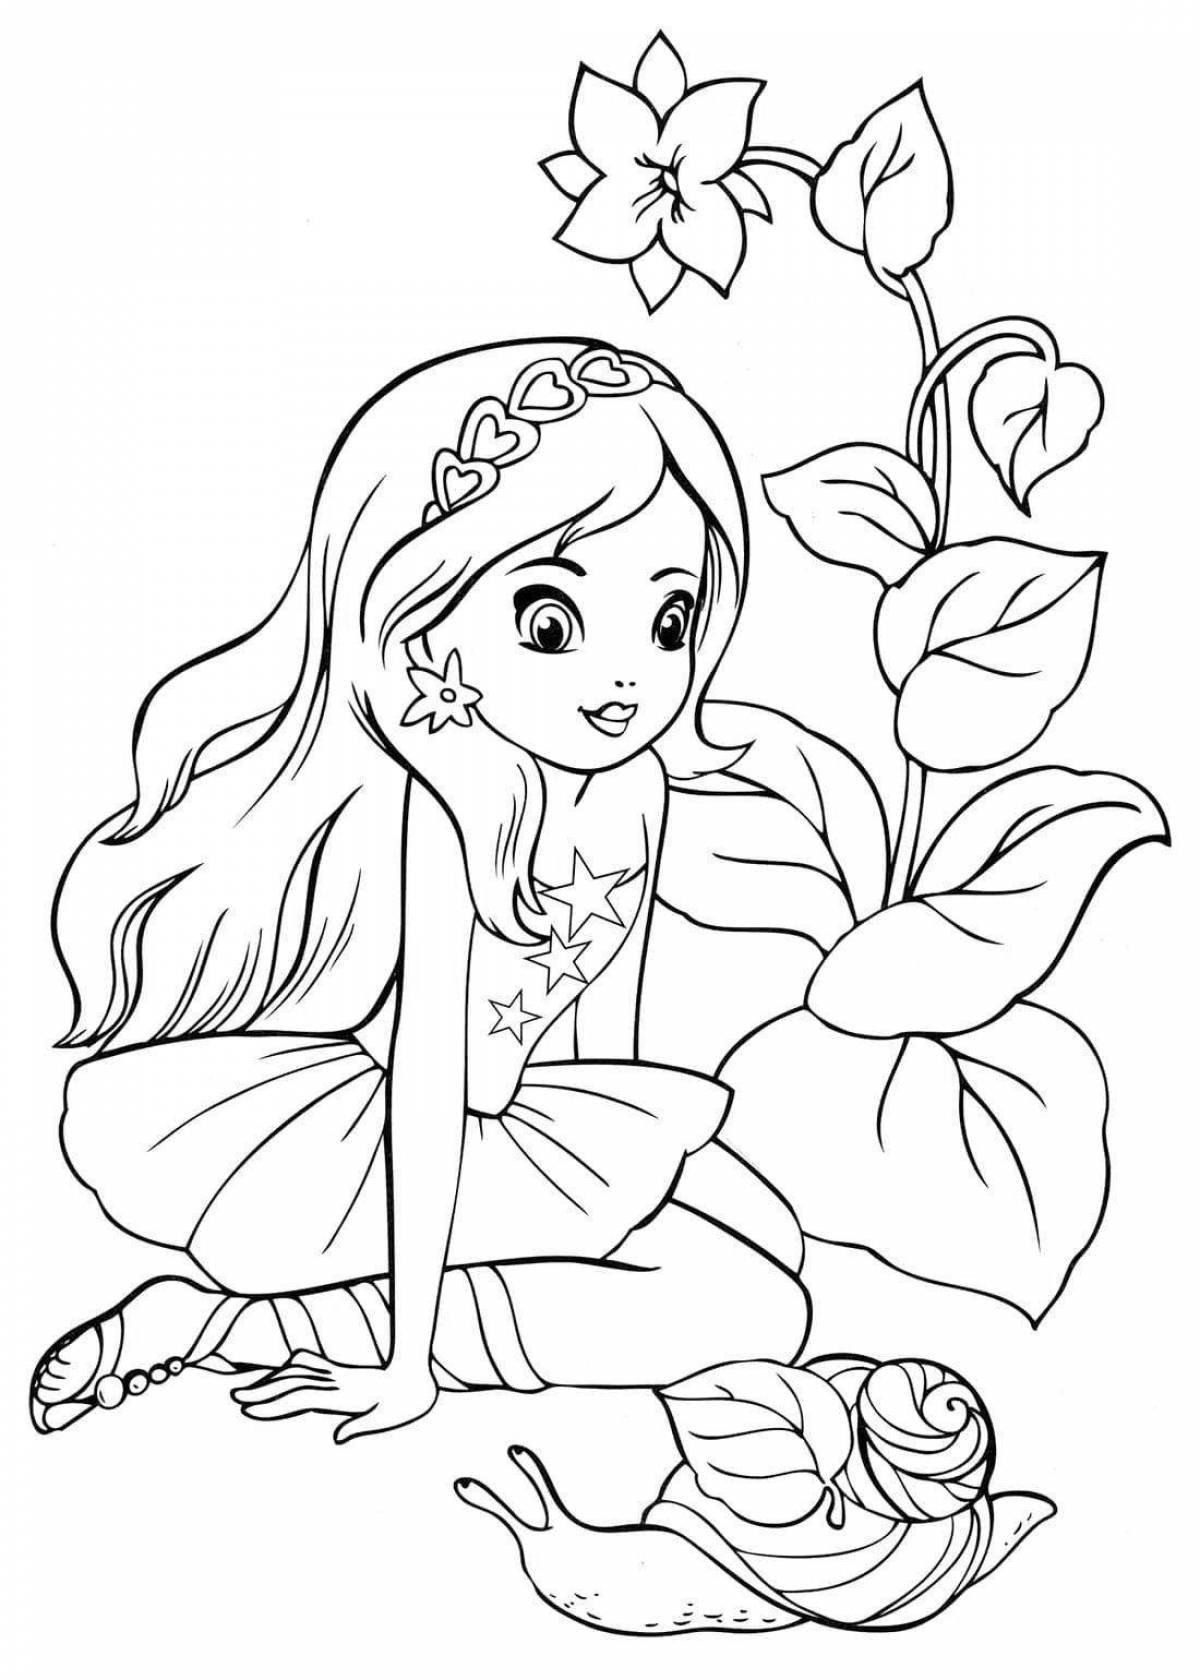 Intricate coloring pages are best for girls